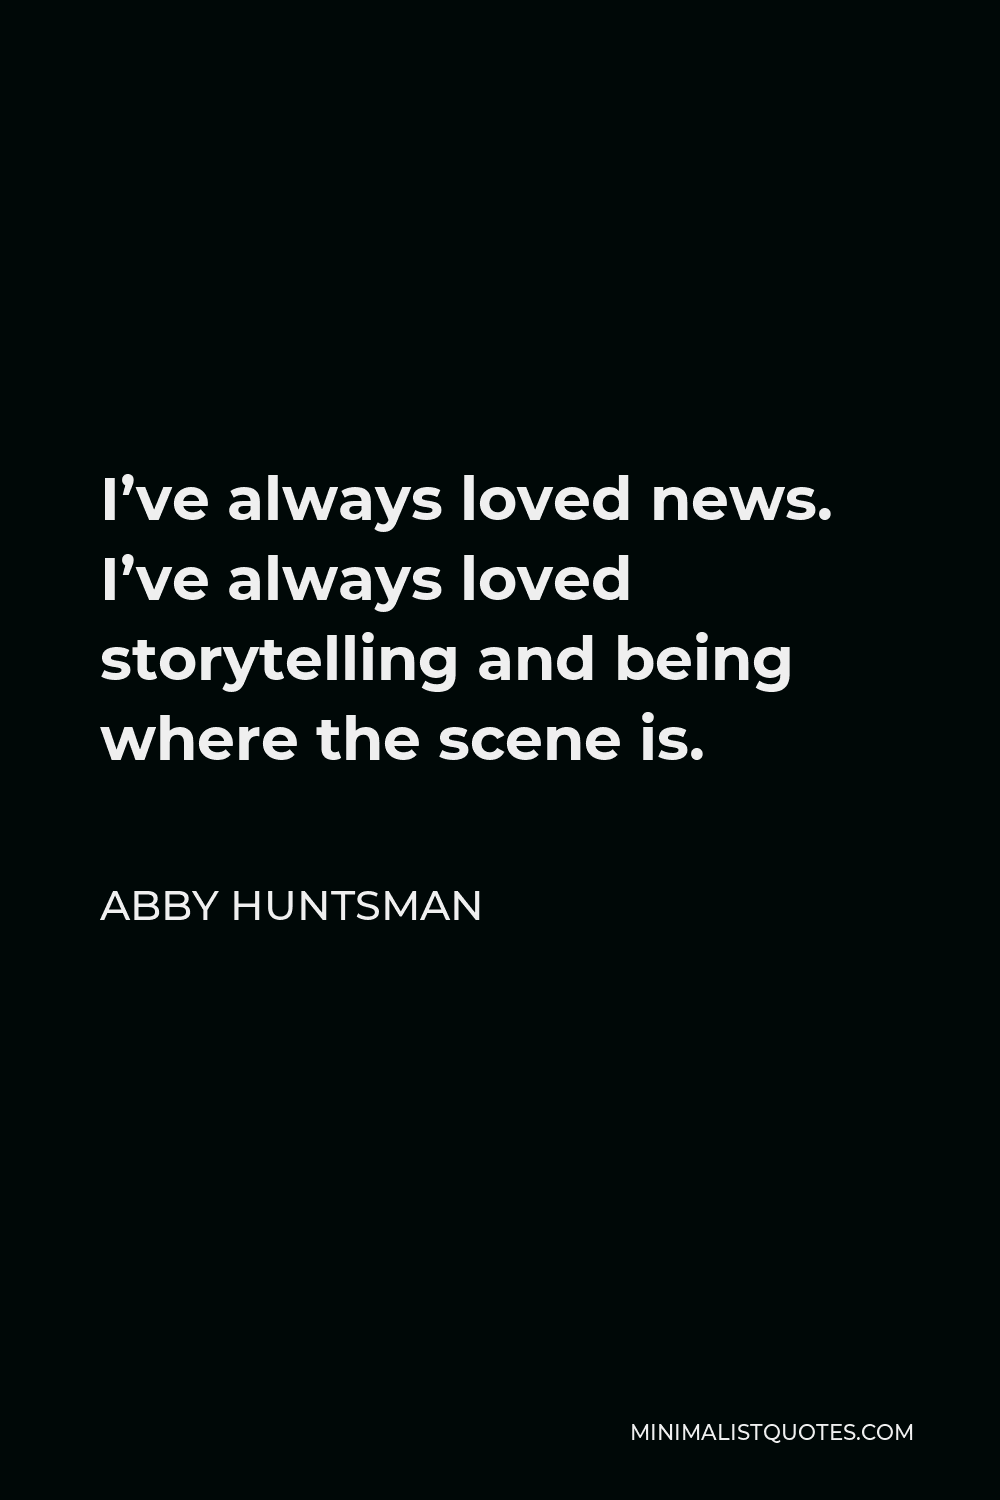 Abby Huntsman Quote - I’ve always loved news. I’ve always loved storytelling and being where the scene is.